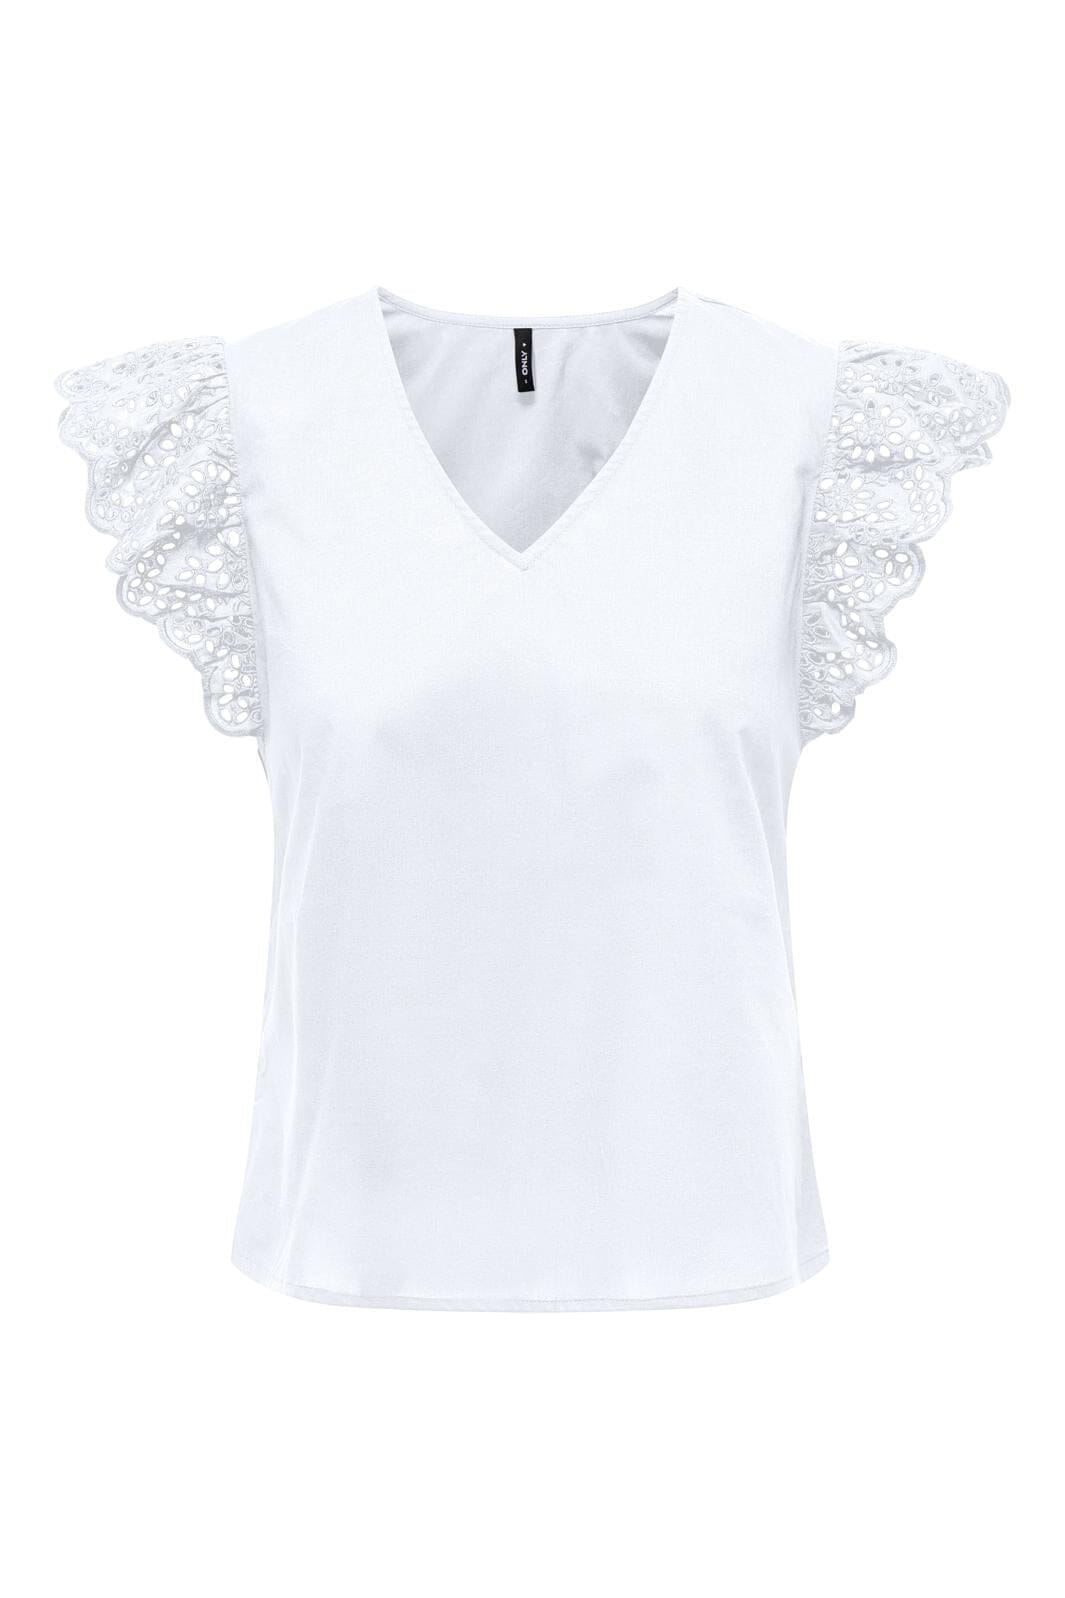 Only - Onllou Life Emb S/S Frill Top - 4428001 Bright White